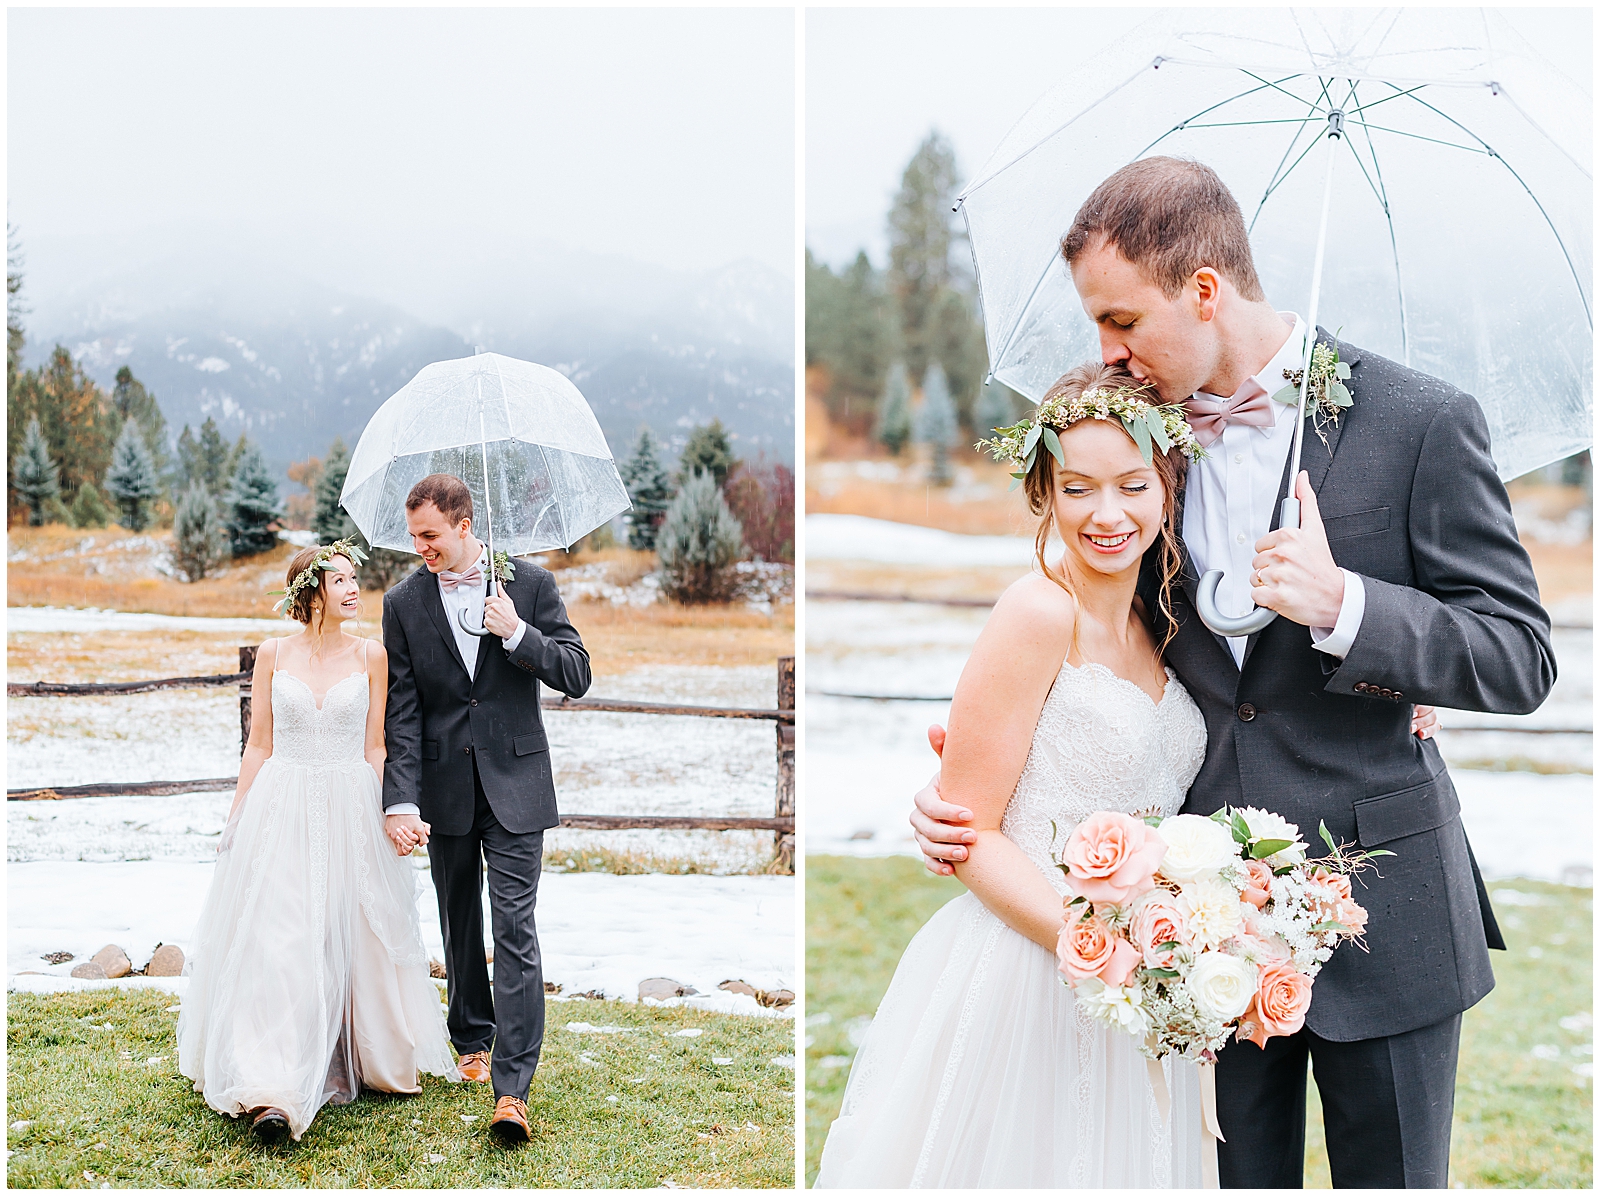 Wedding Portraits in the rain with Clear Umbrellas